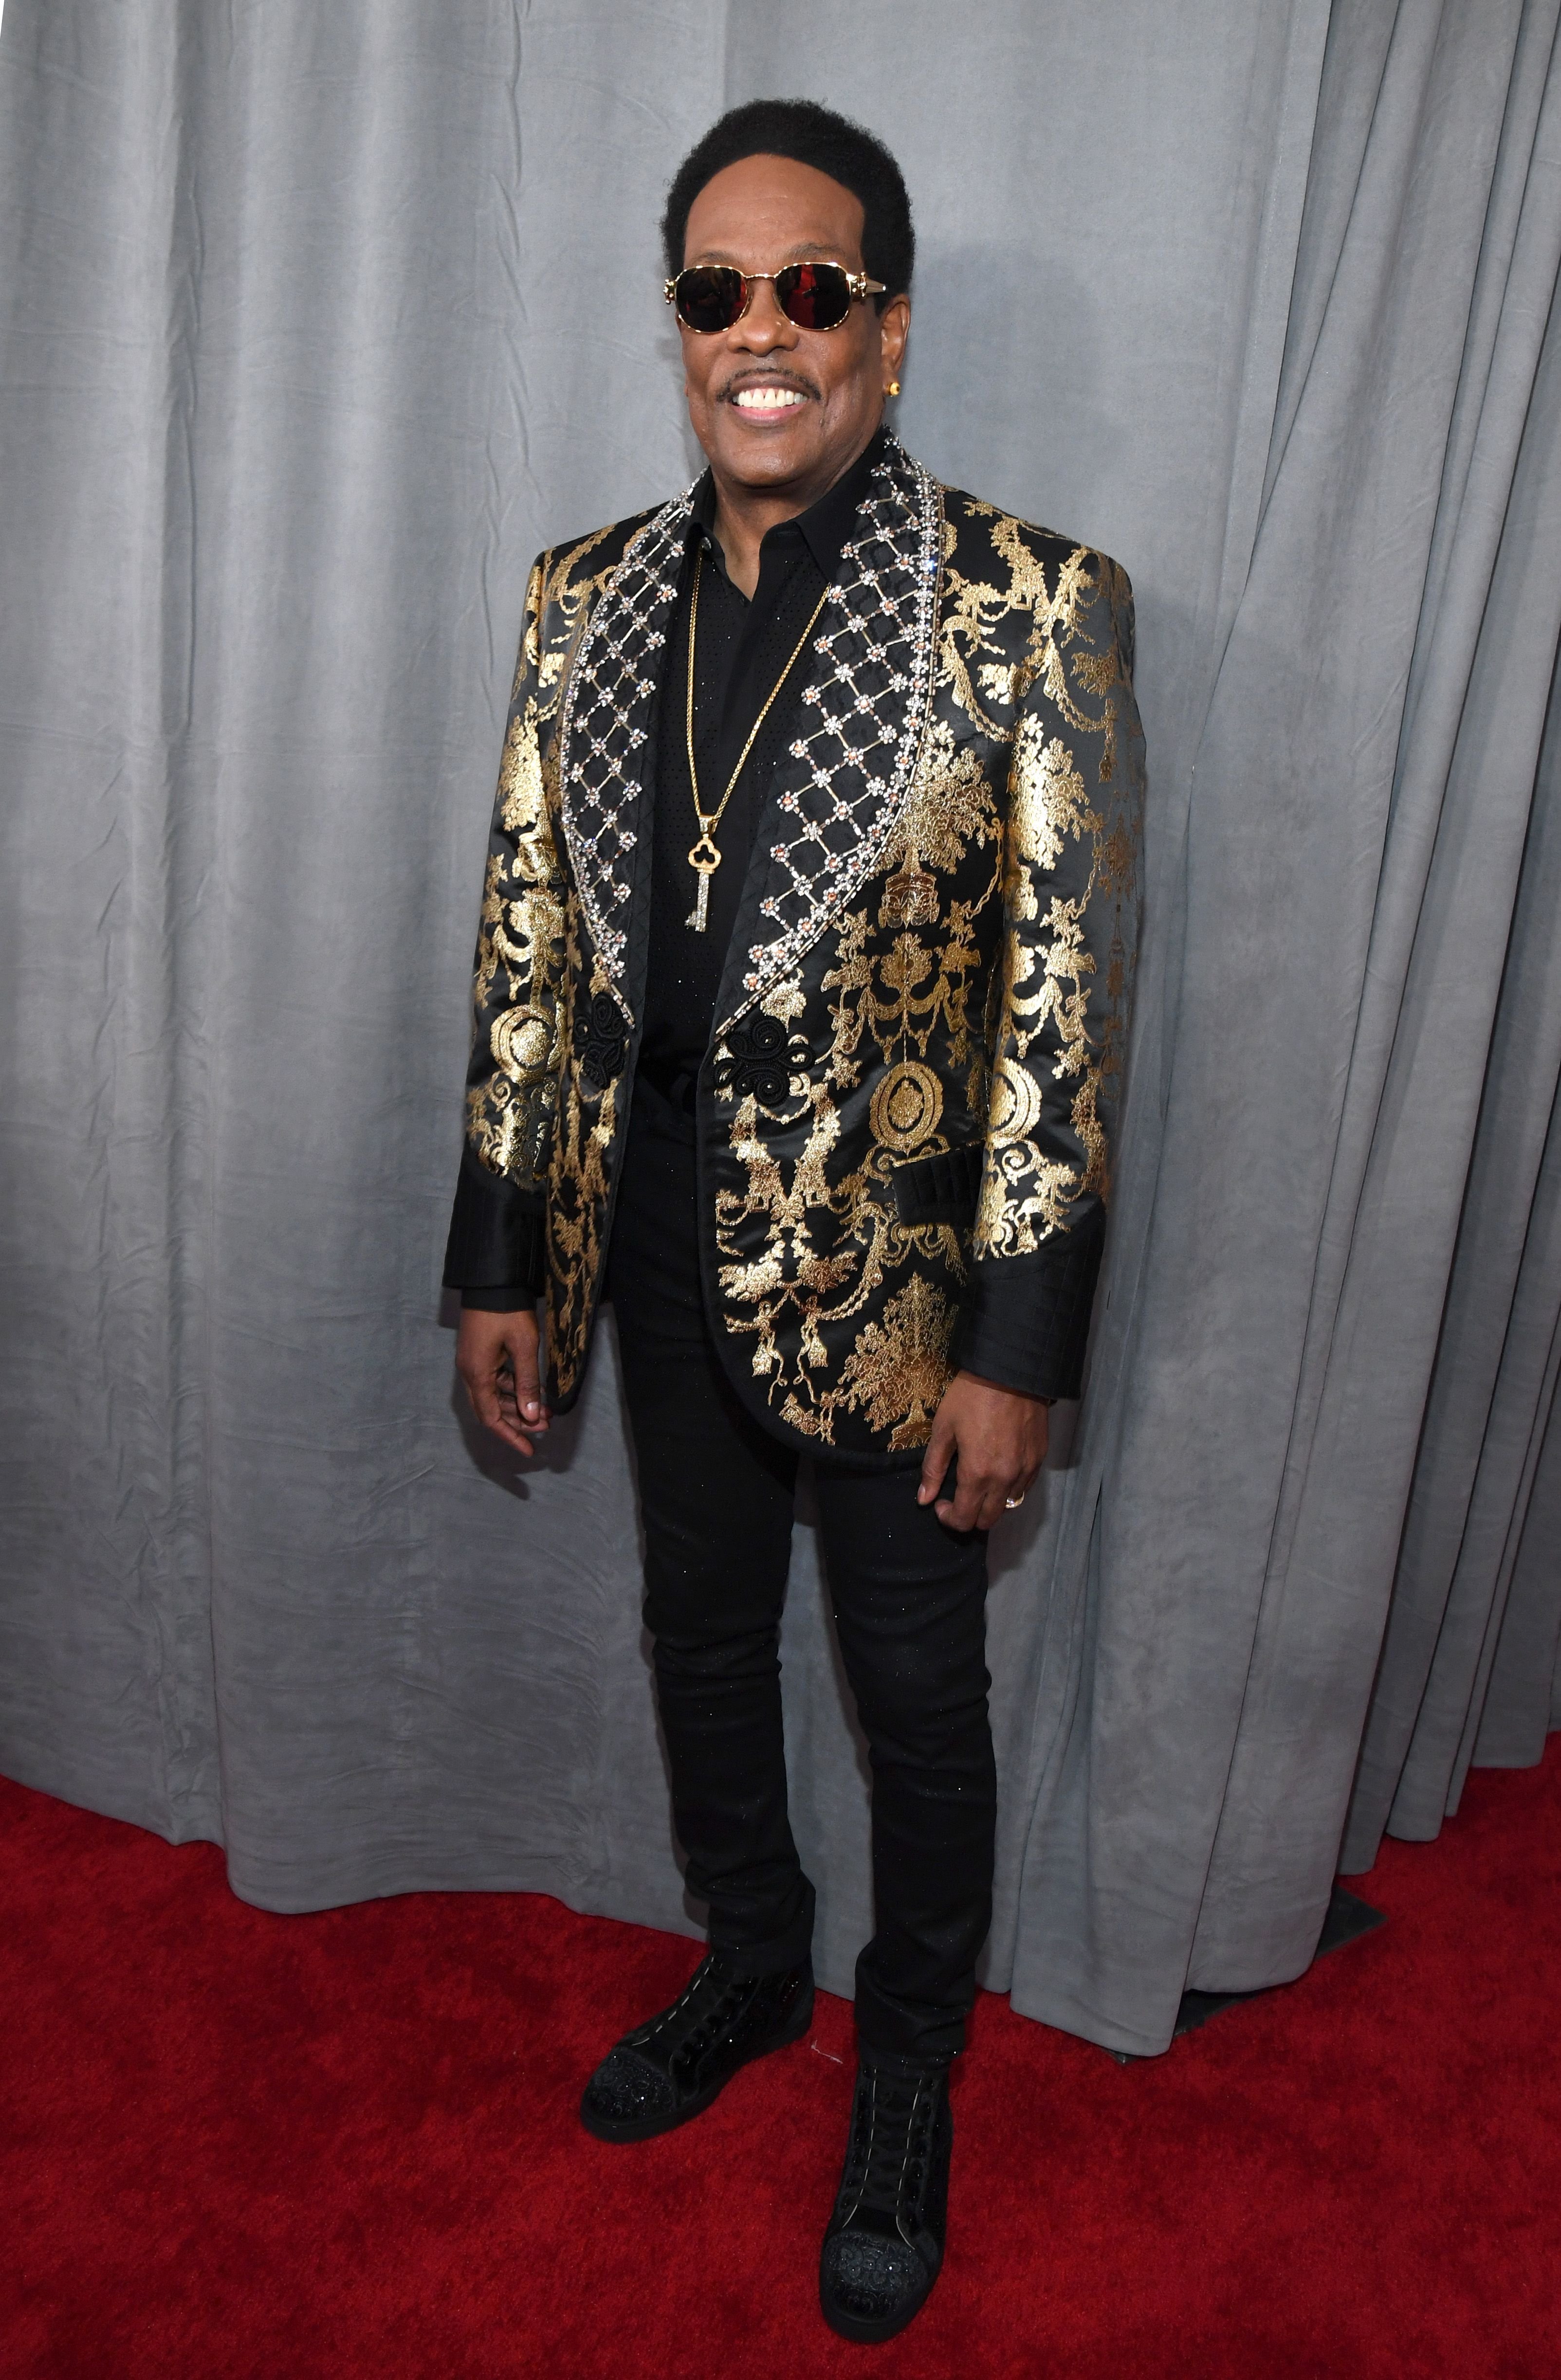 Charlie Wilson attends the 62nd Annual Grammy Awards in January 2020 | Photo: Getty Images